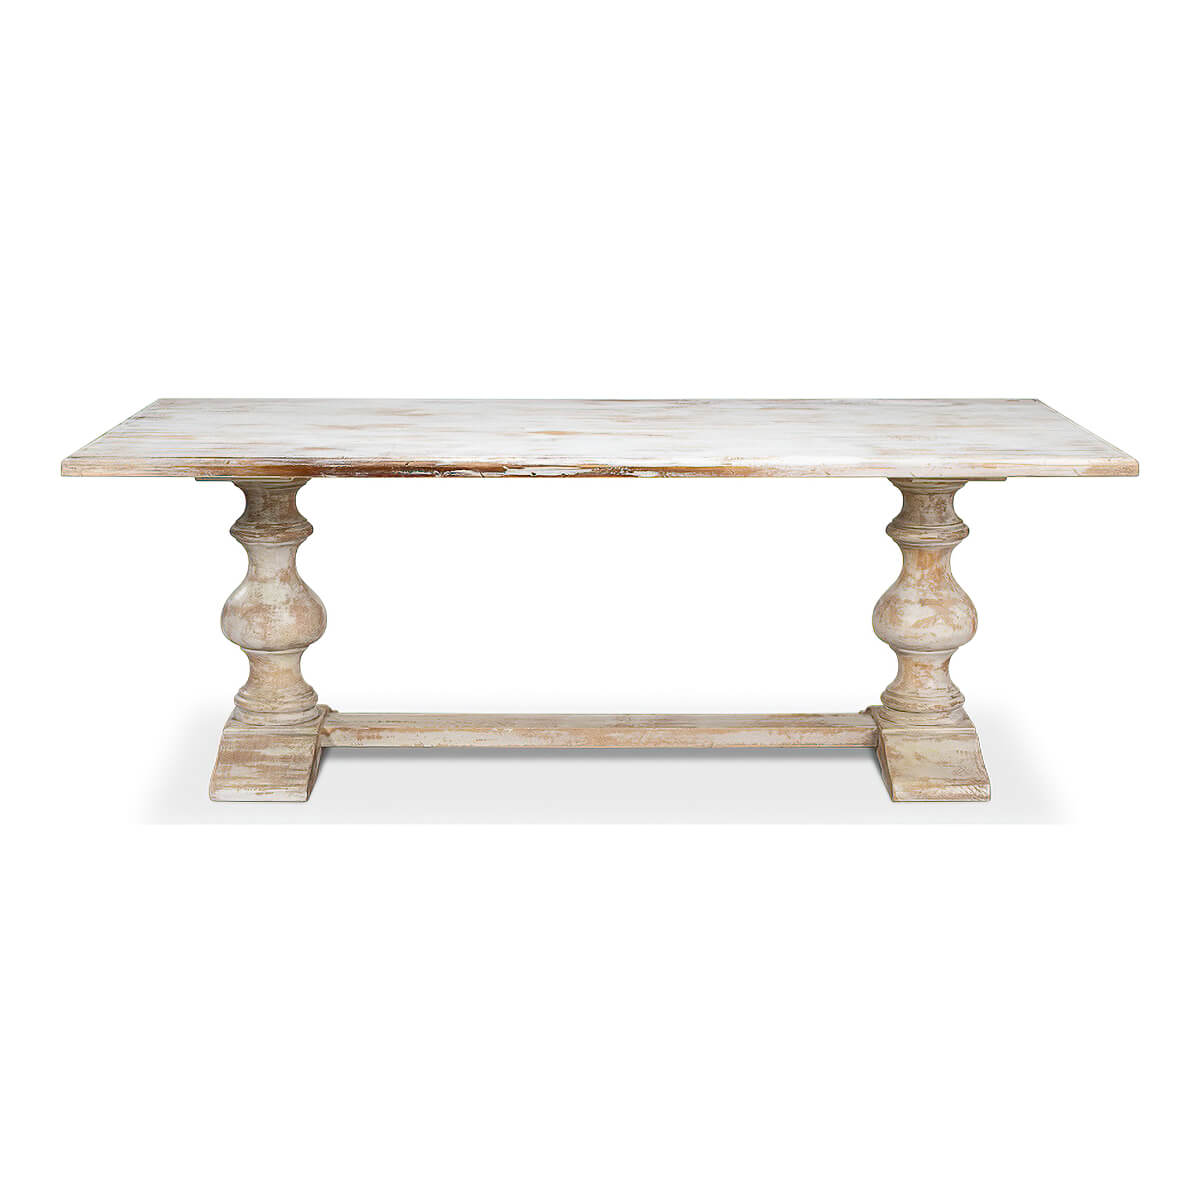 French Provincial Refectory Table - English Georgian America